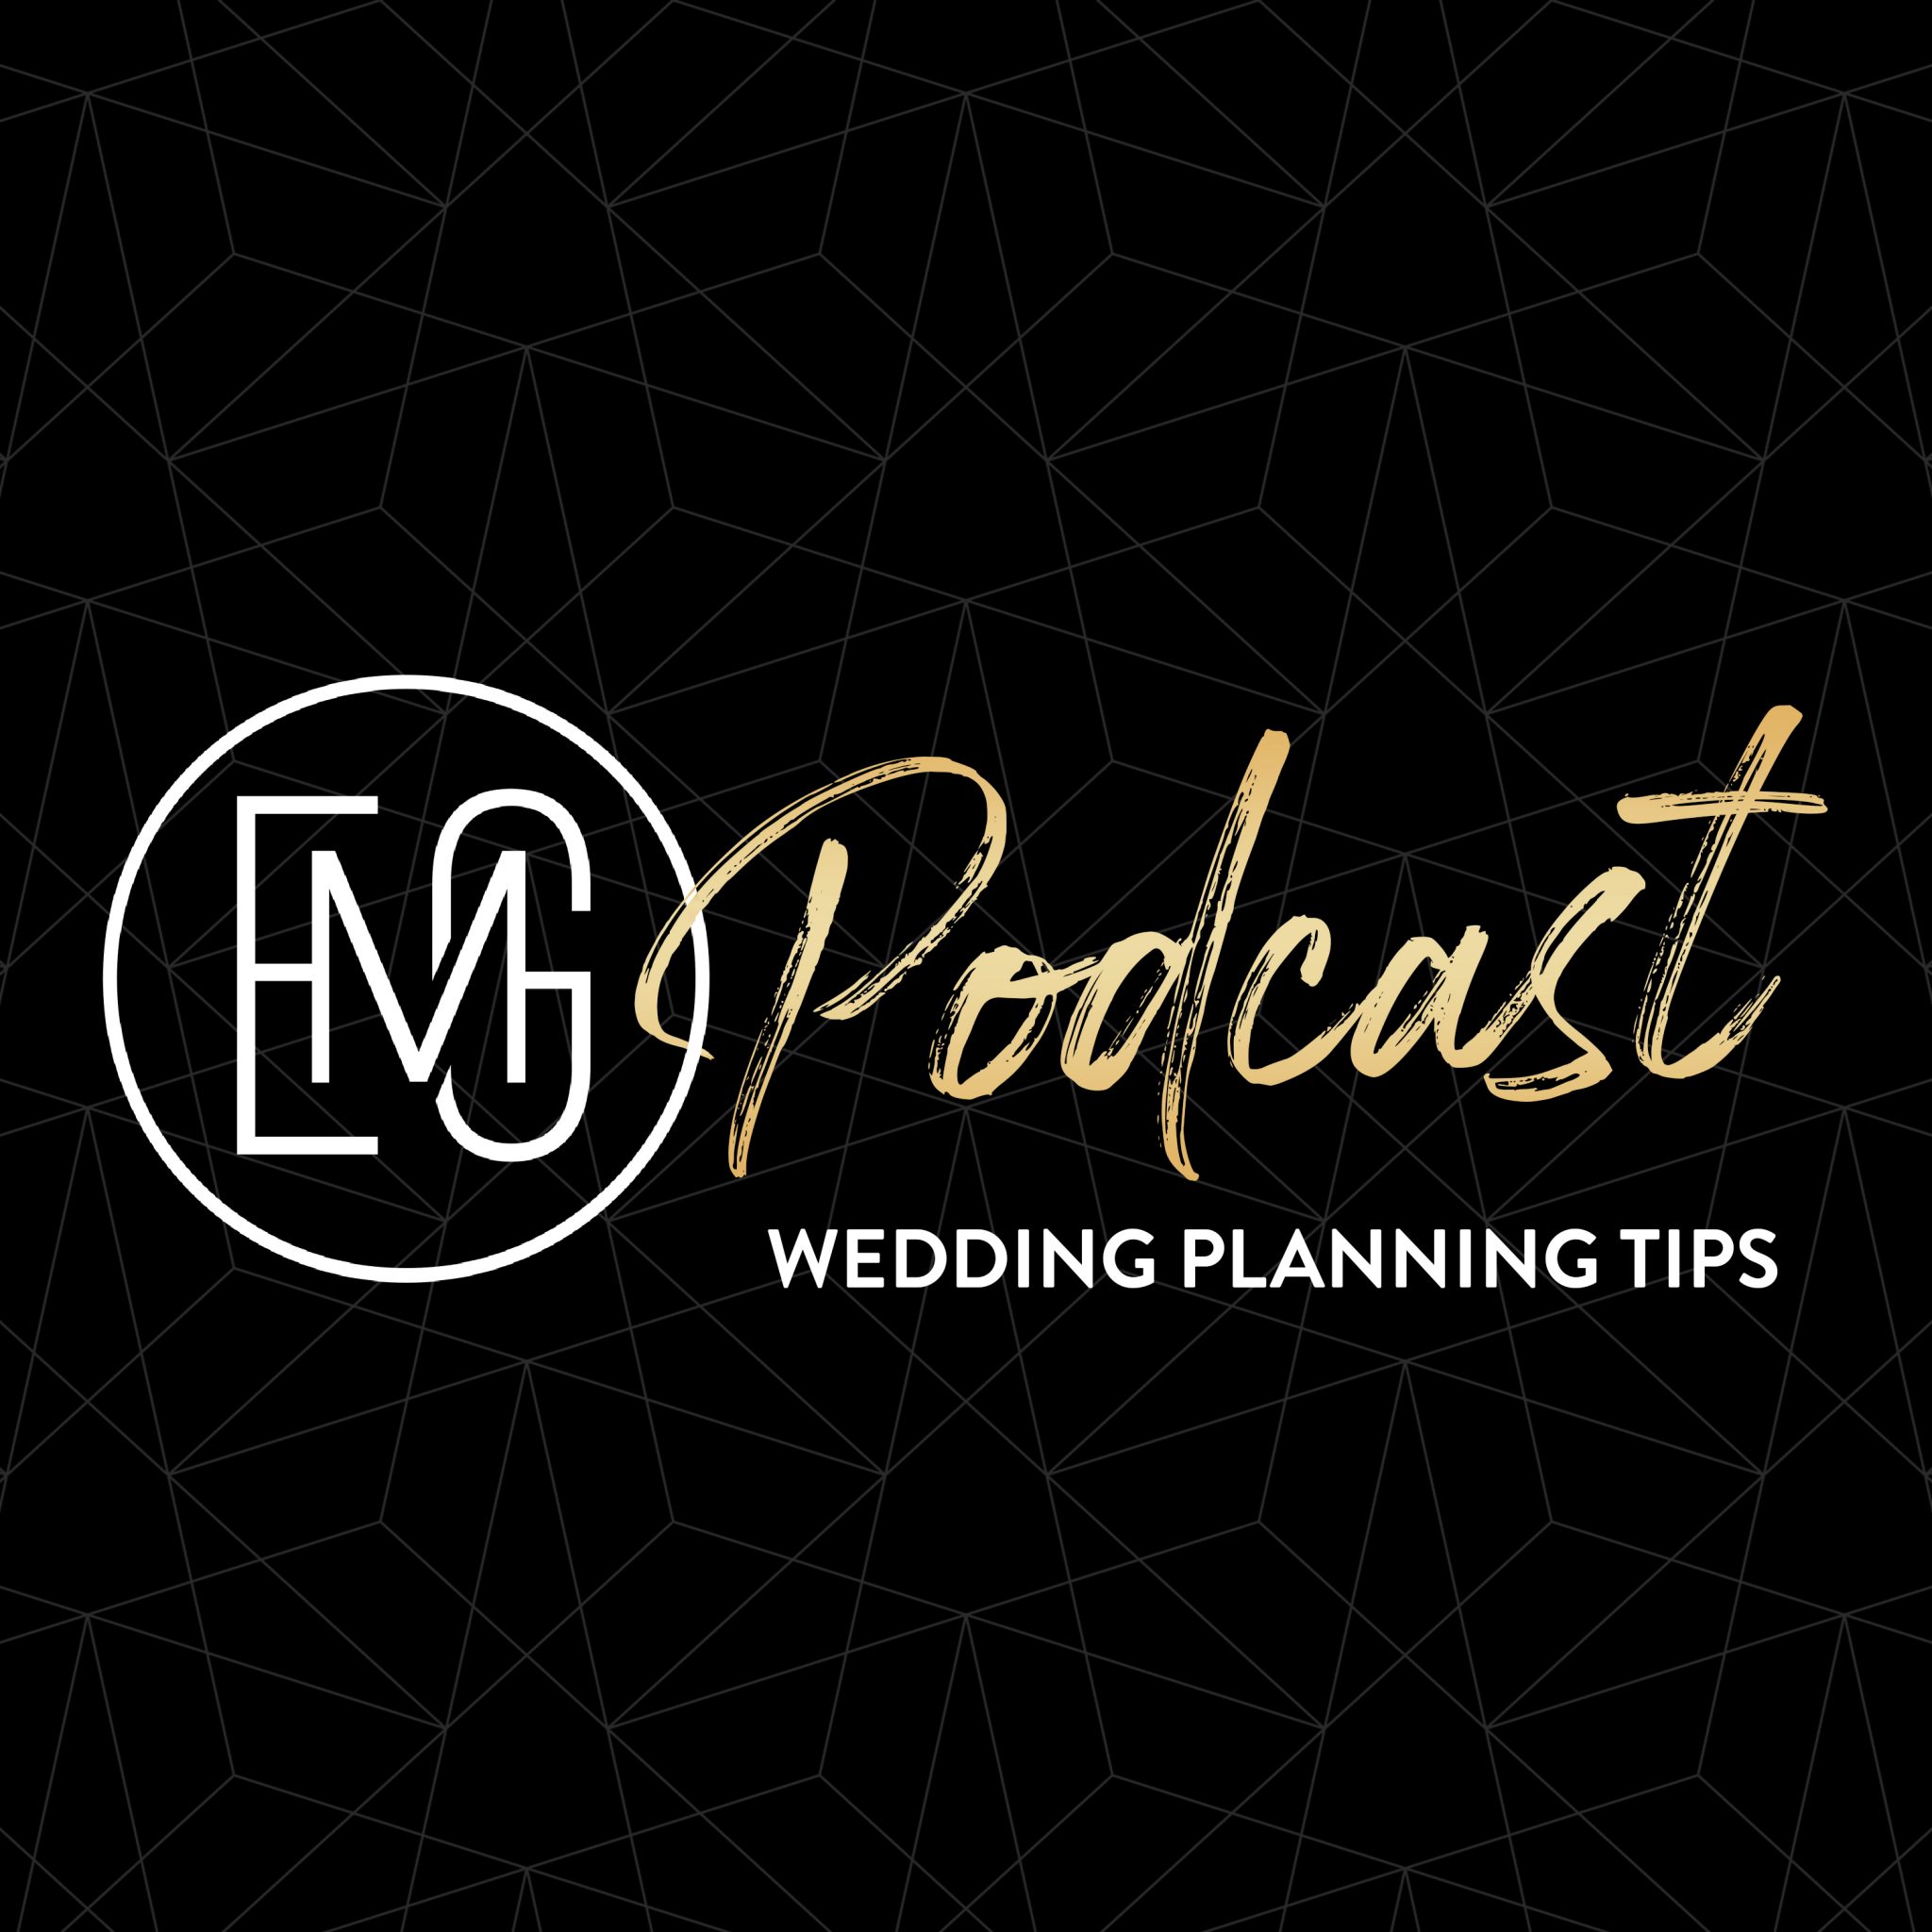 Planning Tips: Choosing Your Venue